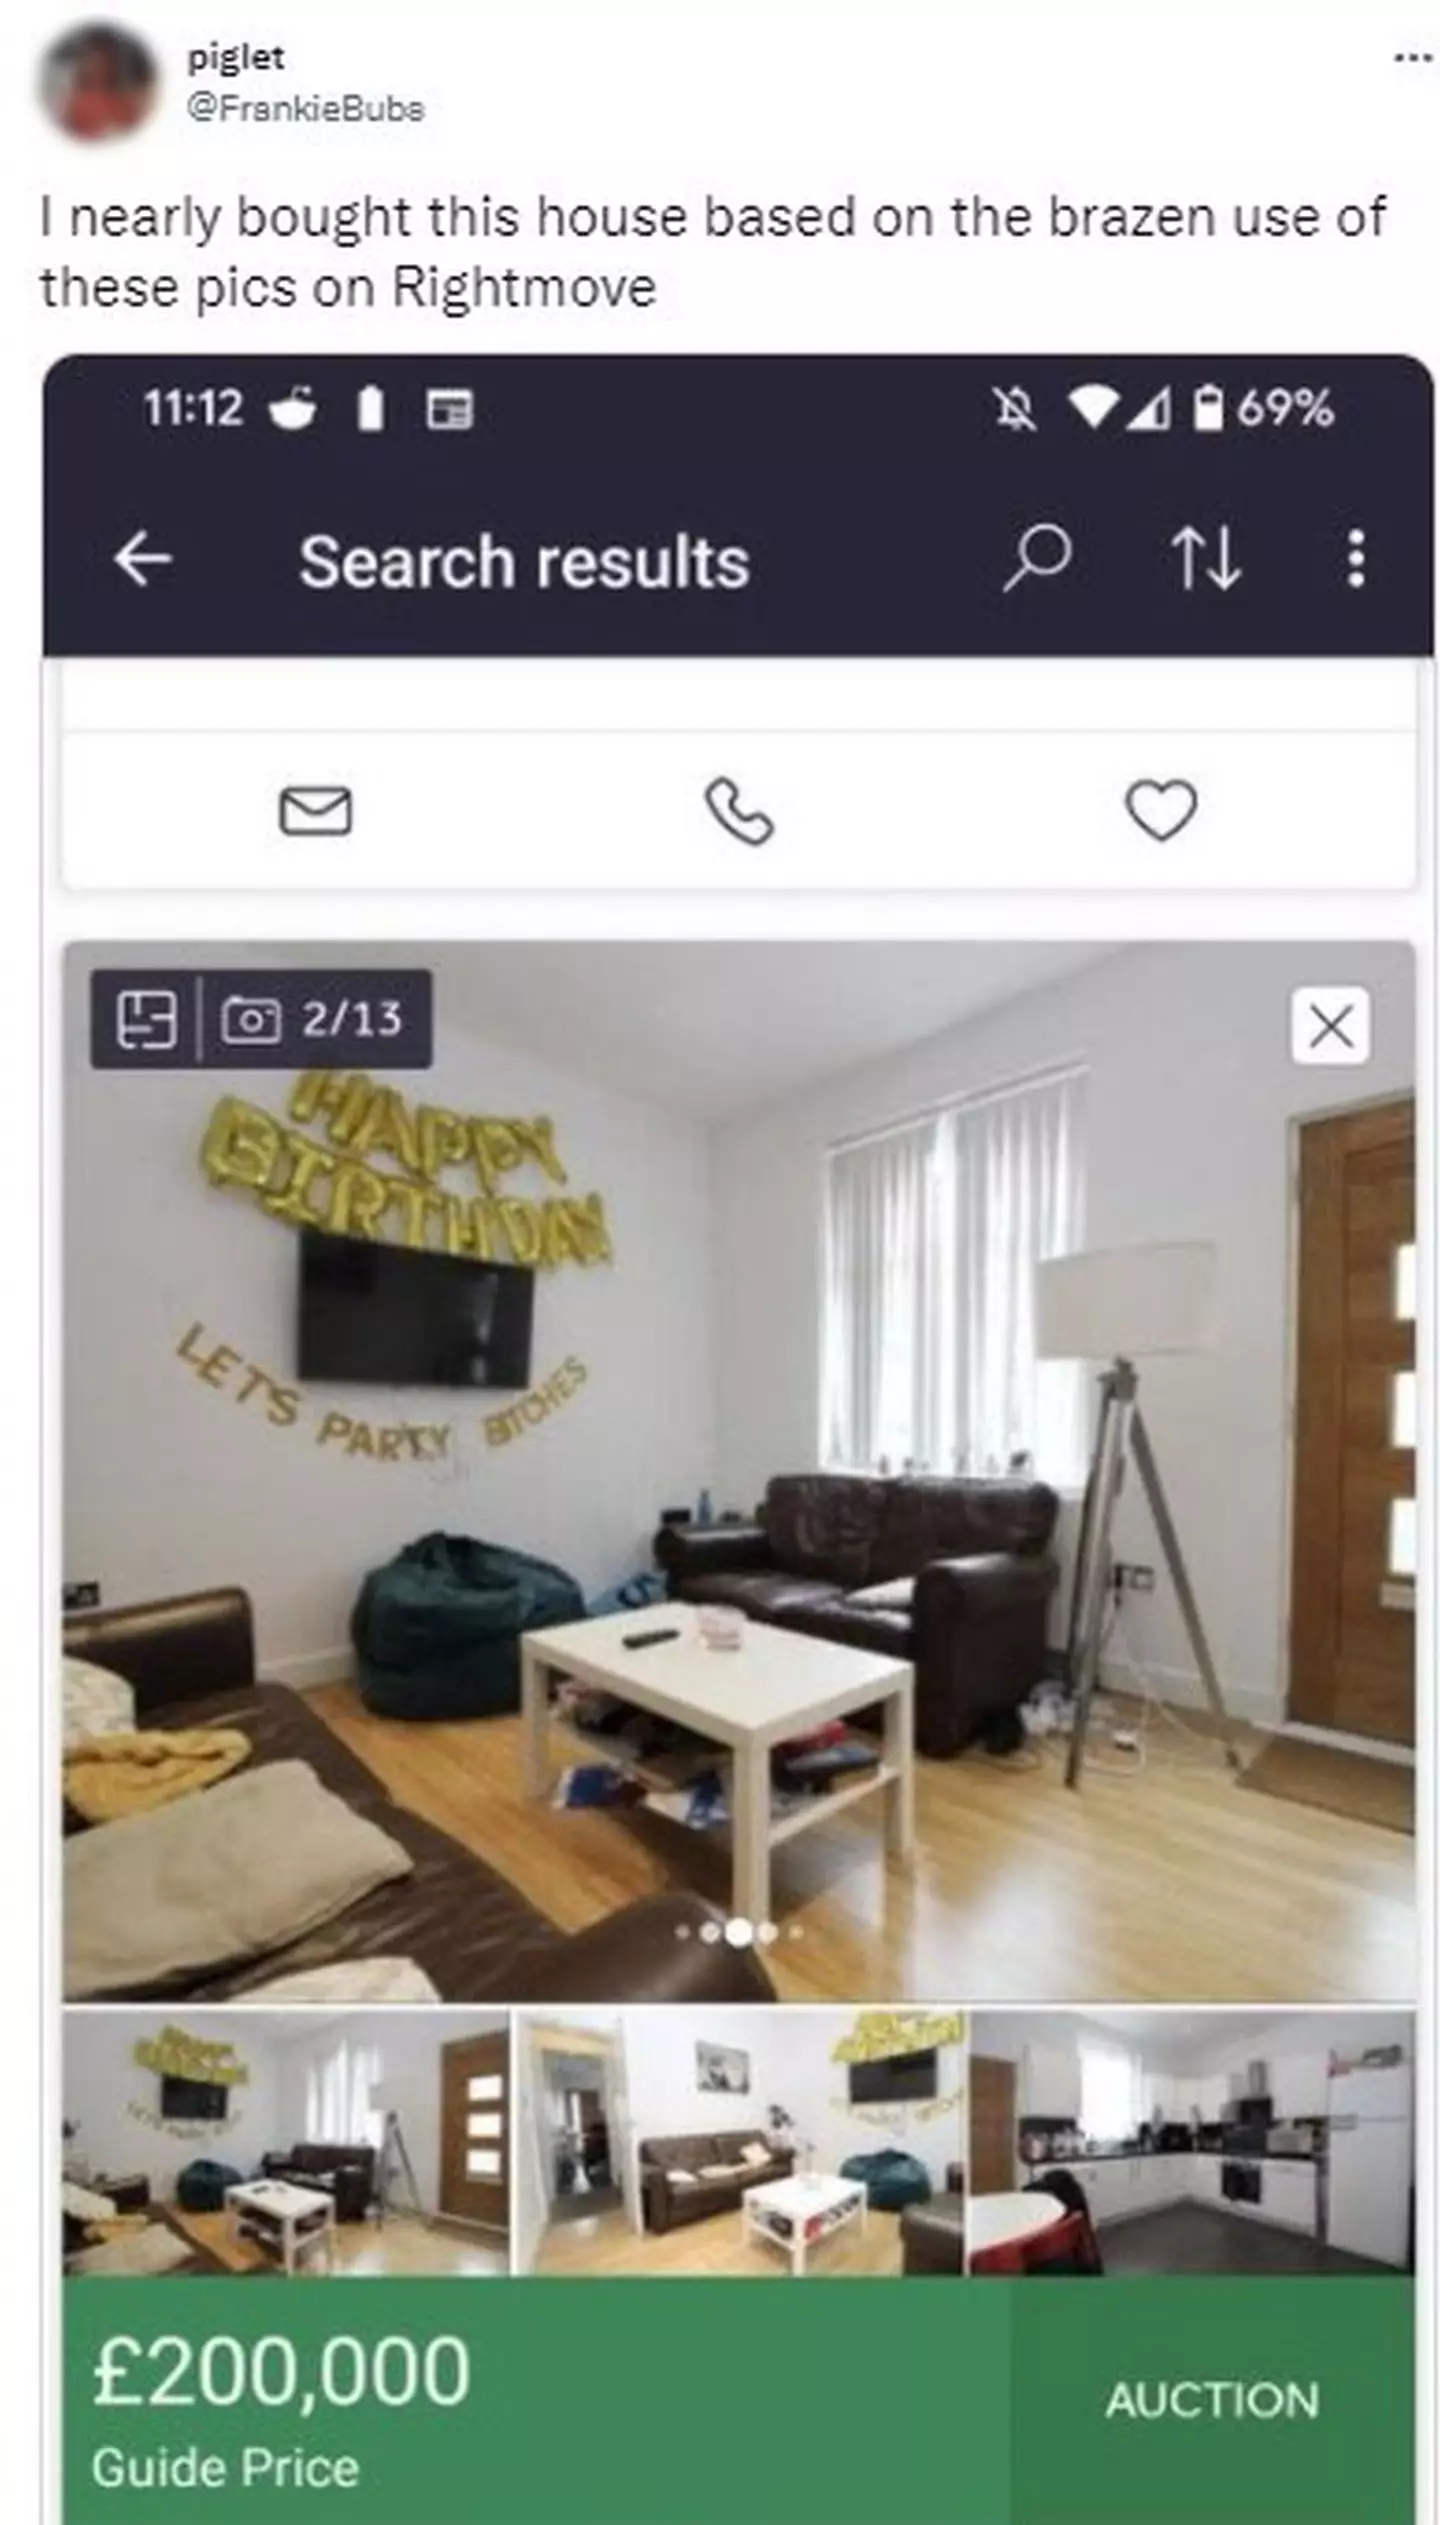 The picture was used for adverts on Rightmove (